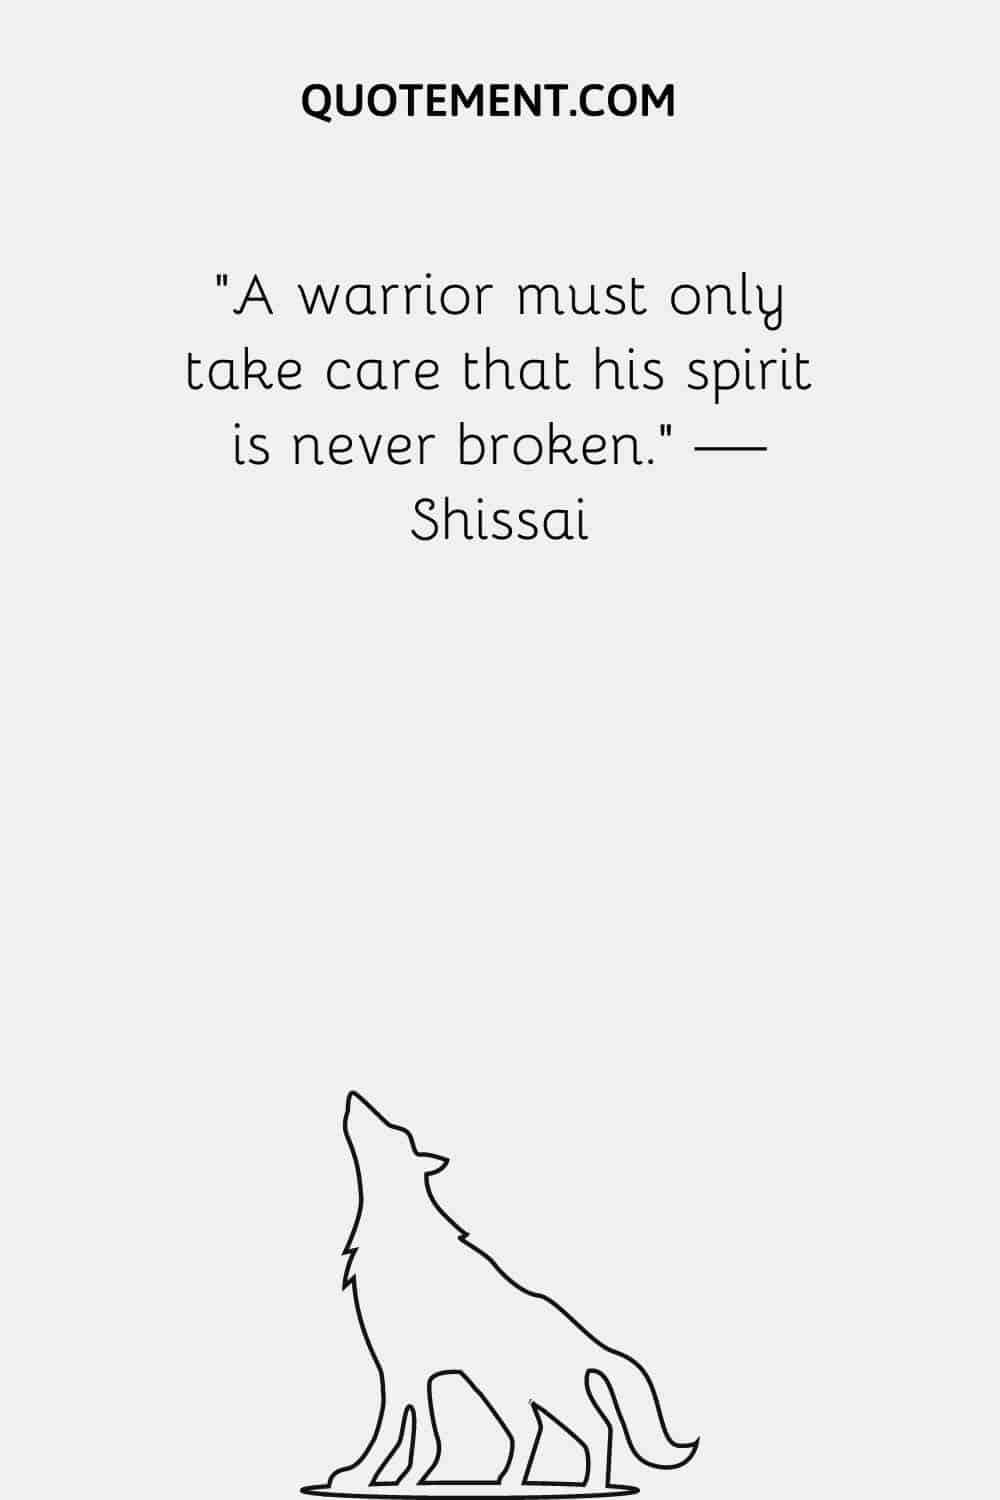 A warrior must only take care that his spirit is never broken